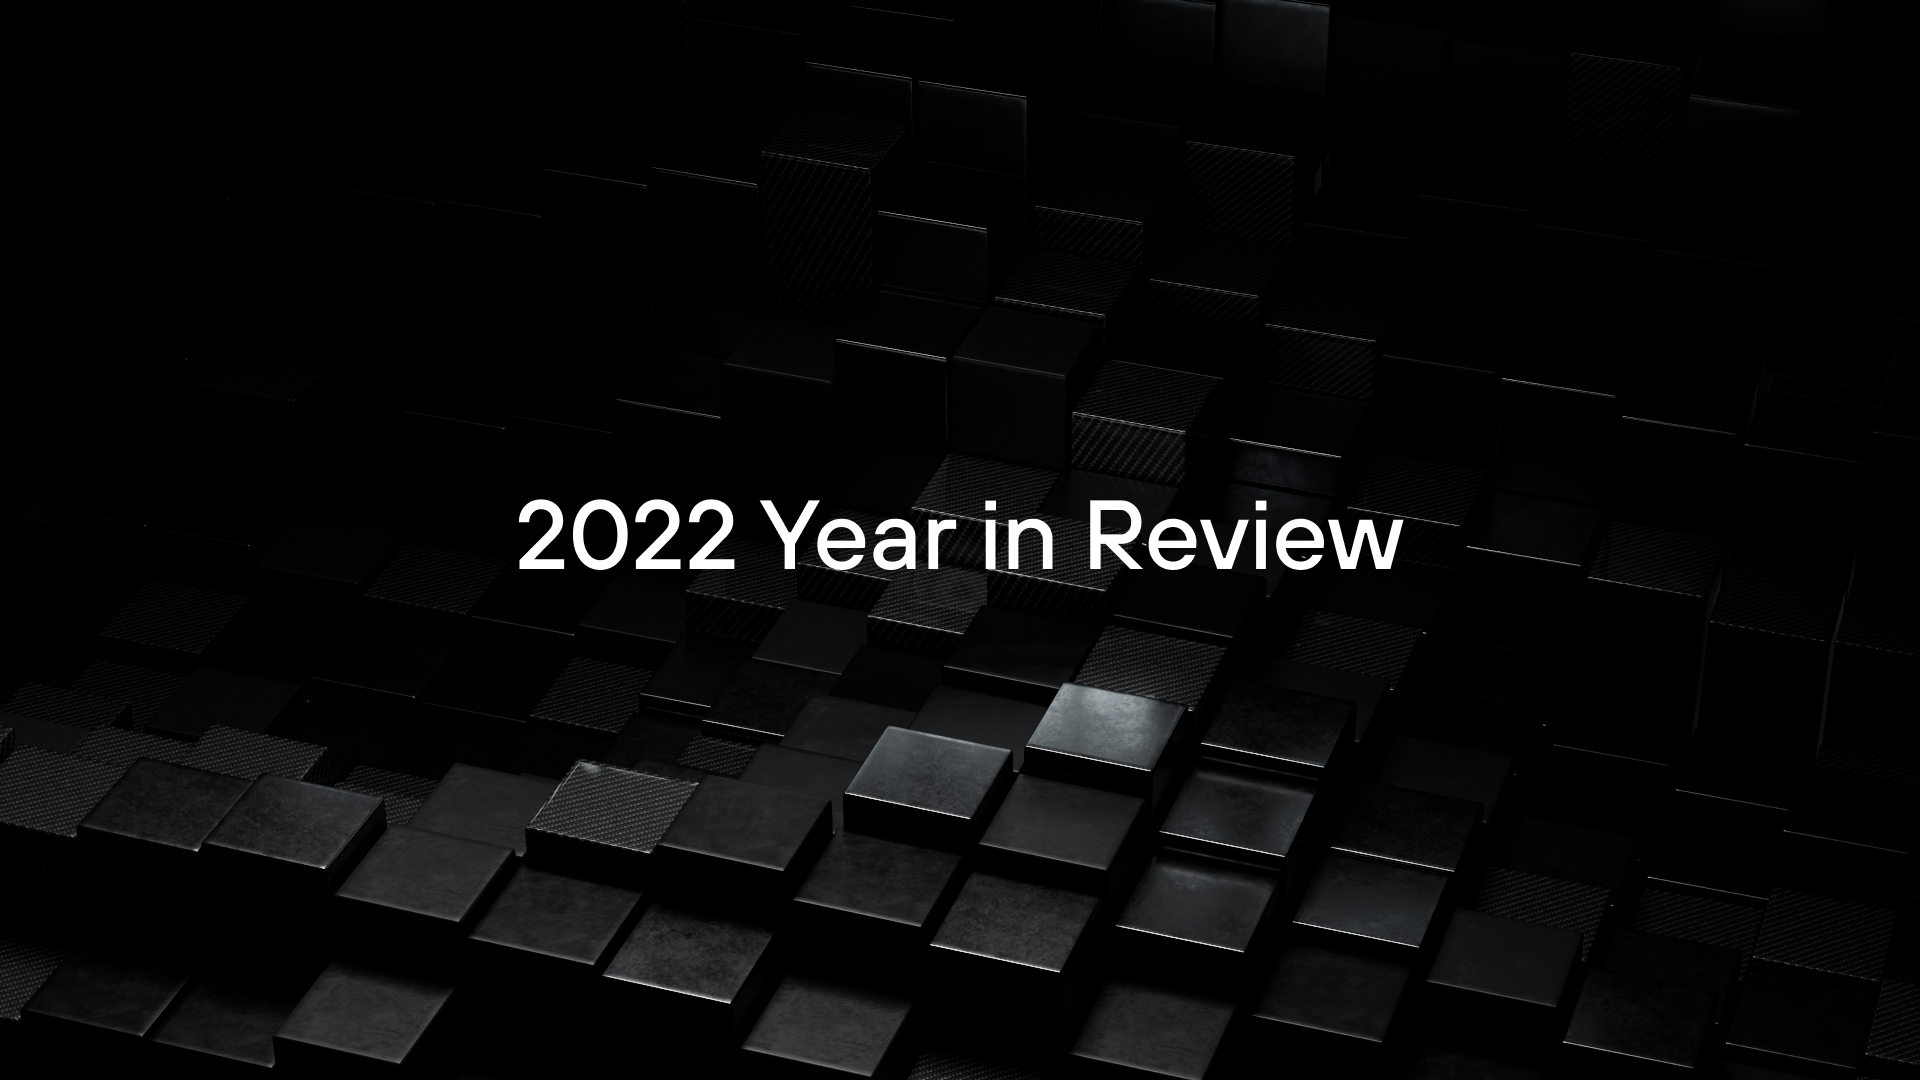 2022 Year In Review - Letter from our CEO